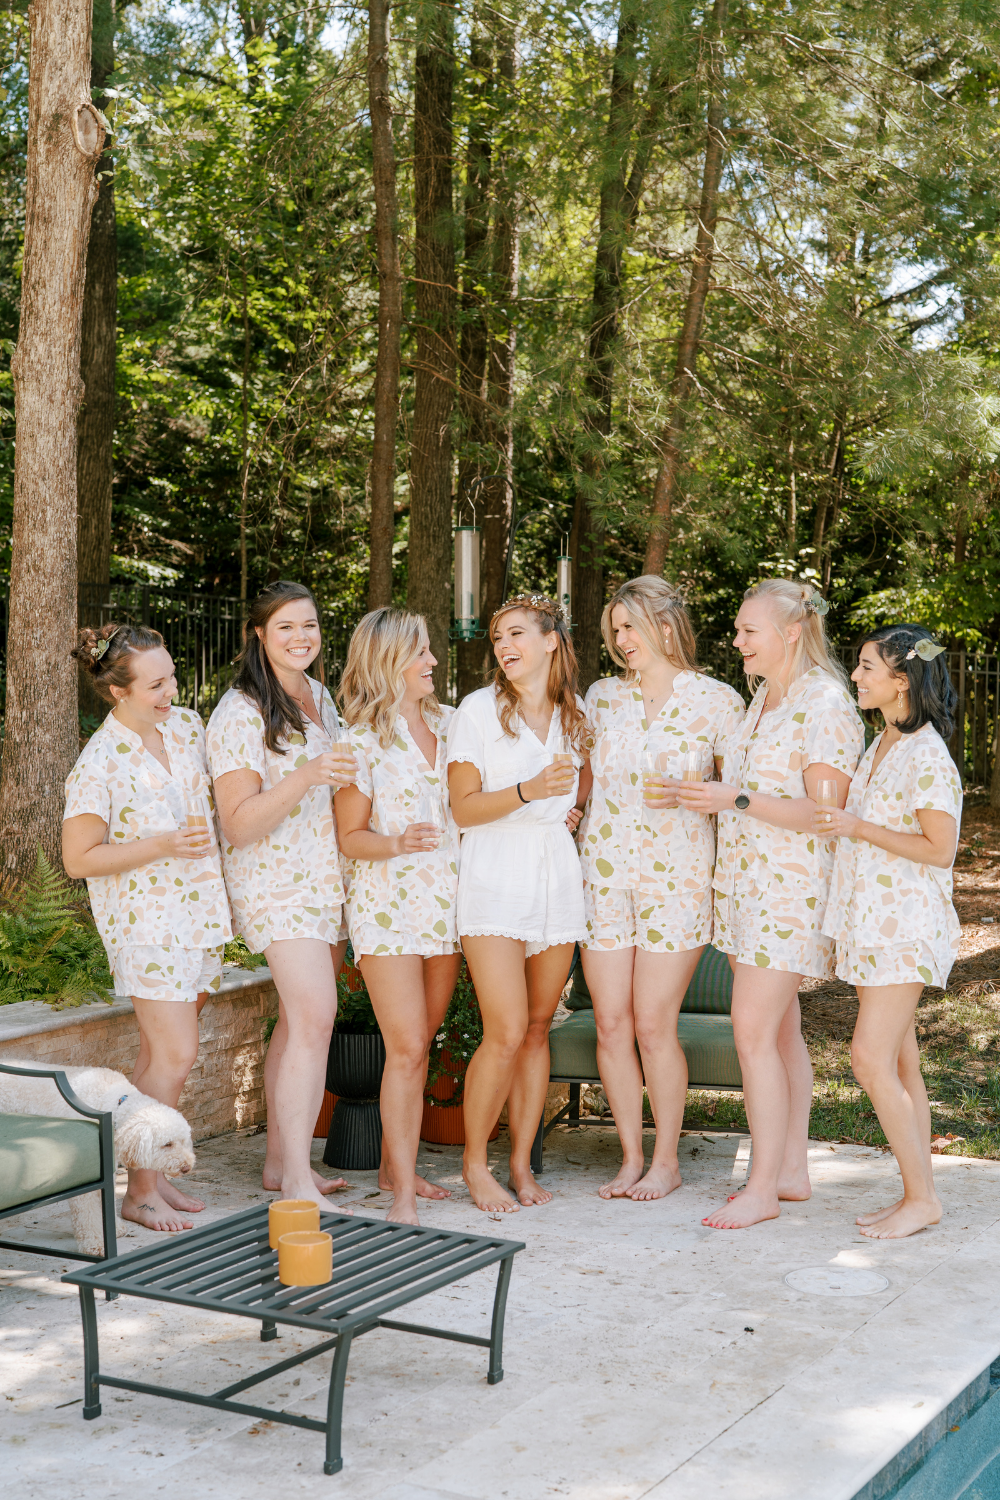 Bride with bridesmaids getting ready for wedding day with drinks